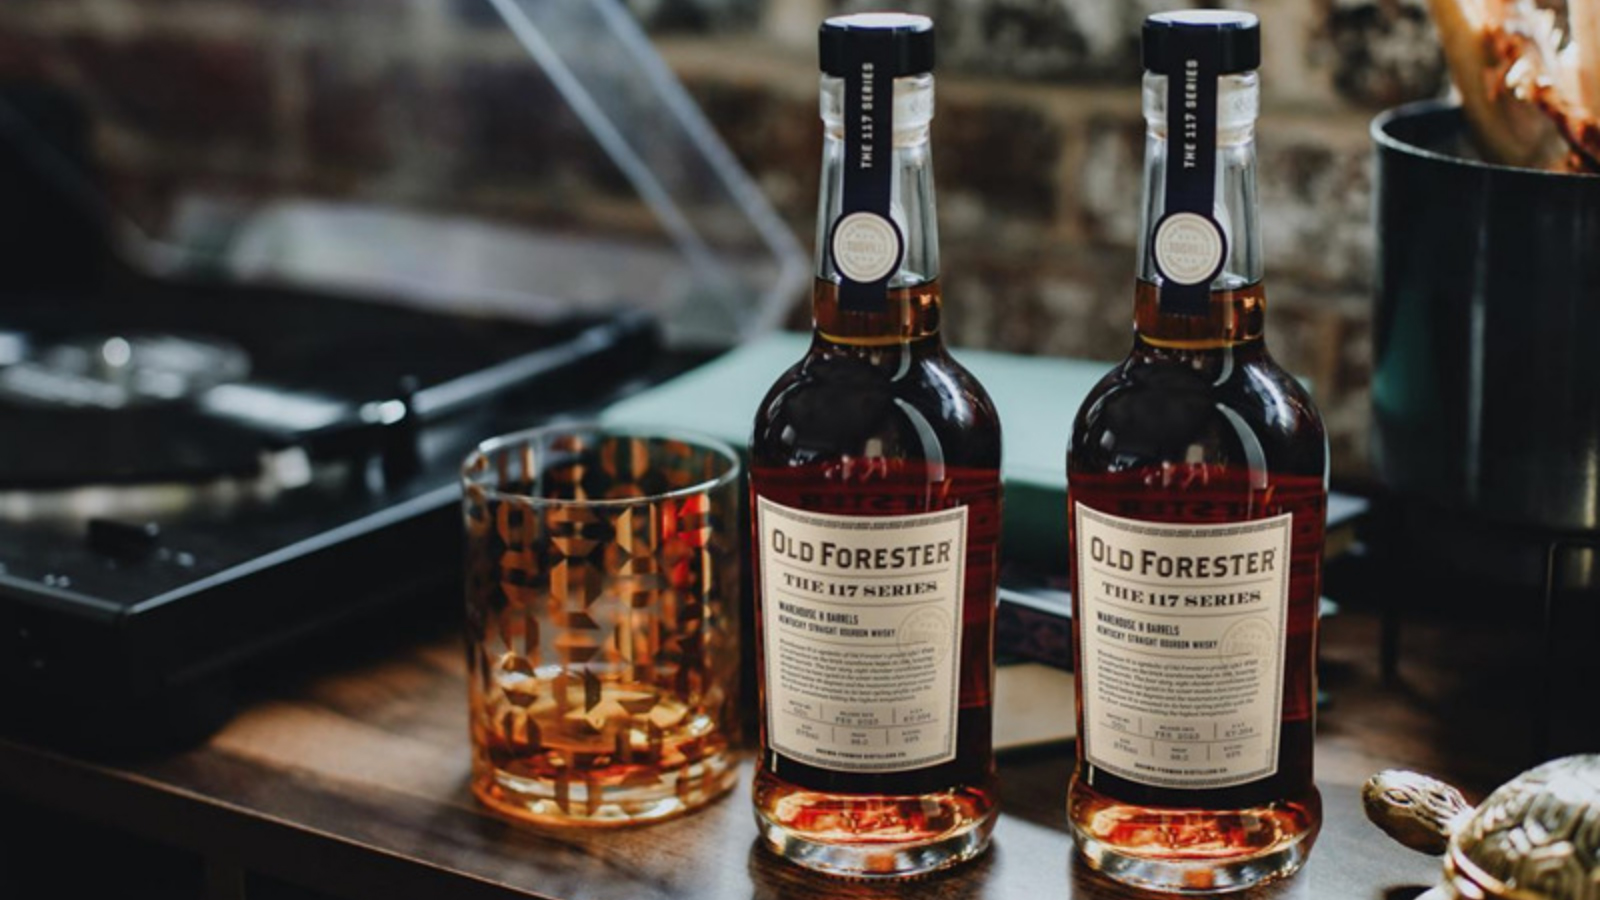 Old Forester Unveils Latest Addition To  117 Series, Warehouse H